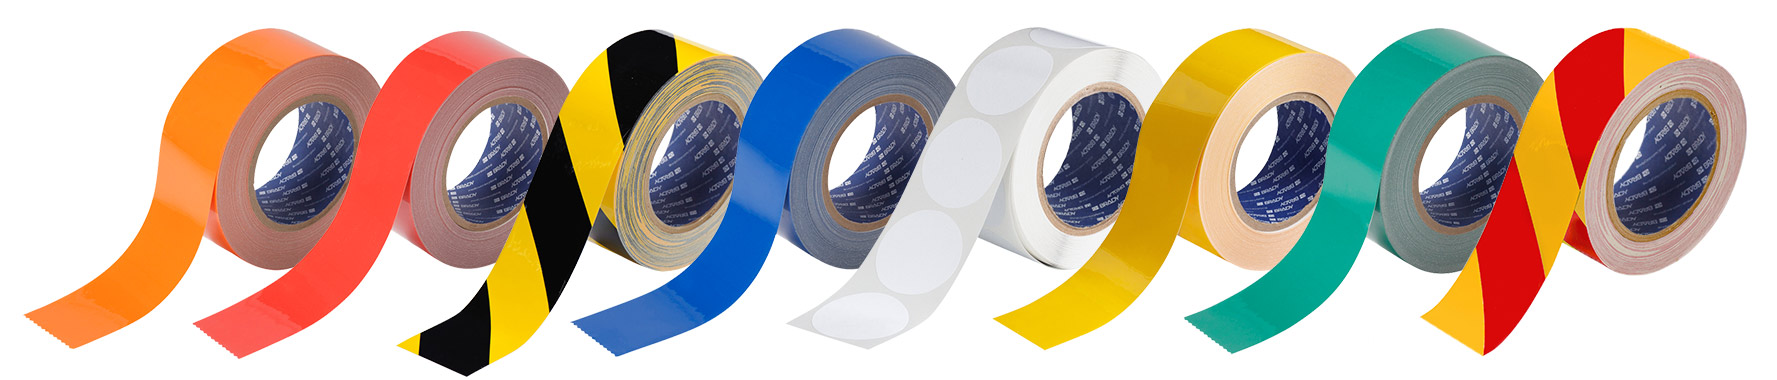 Products from the ToughStripe Floor Tape family. There are several colors and patterns to choose from.